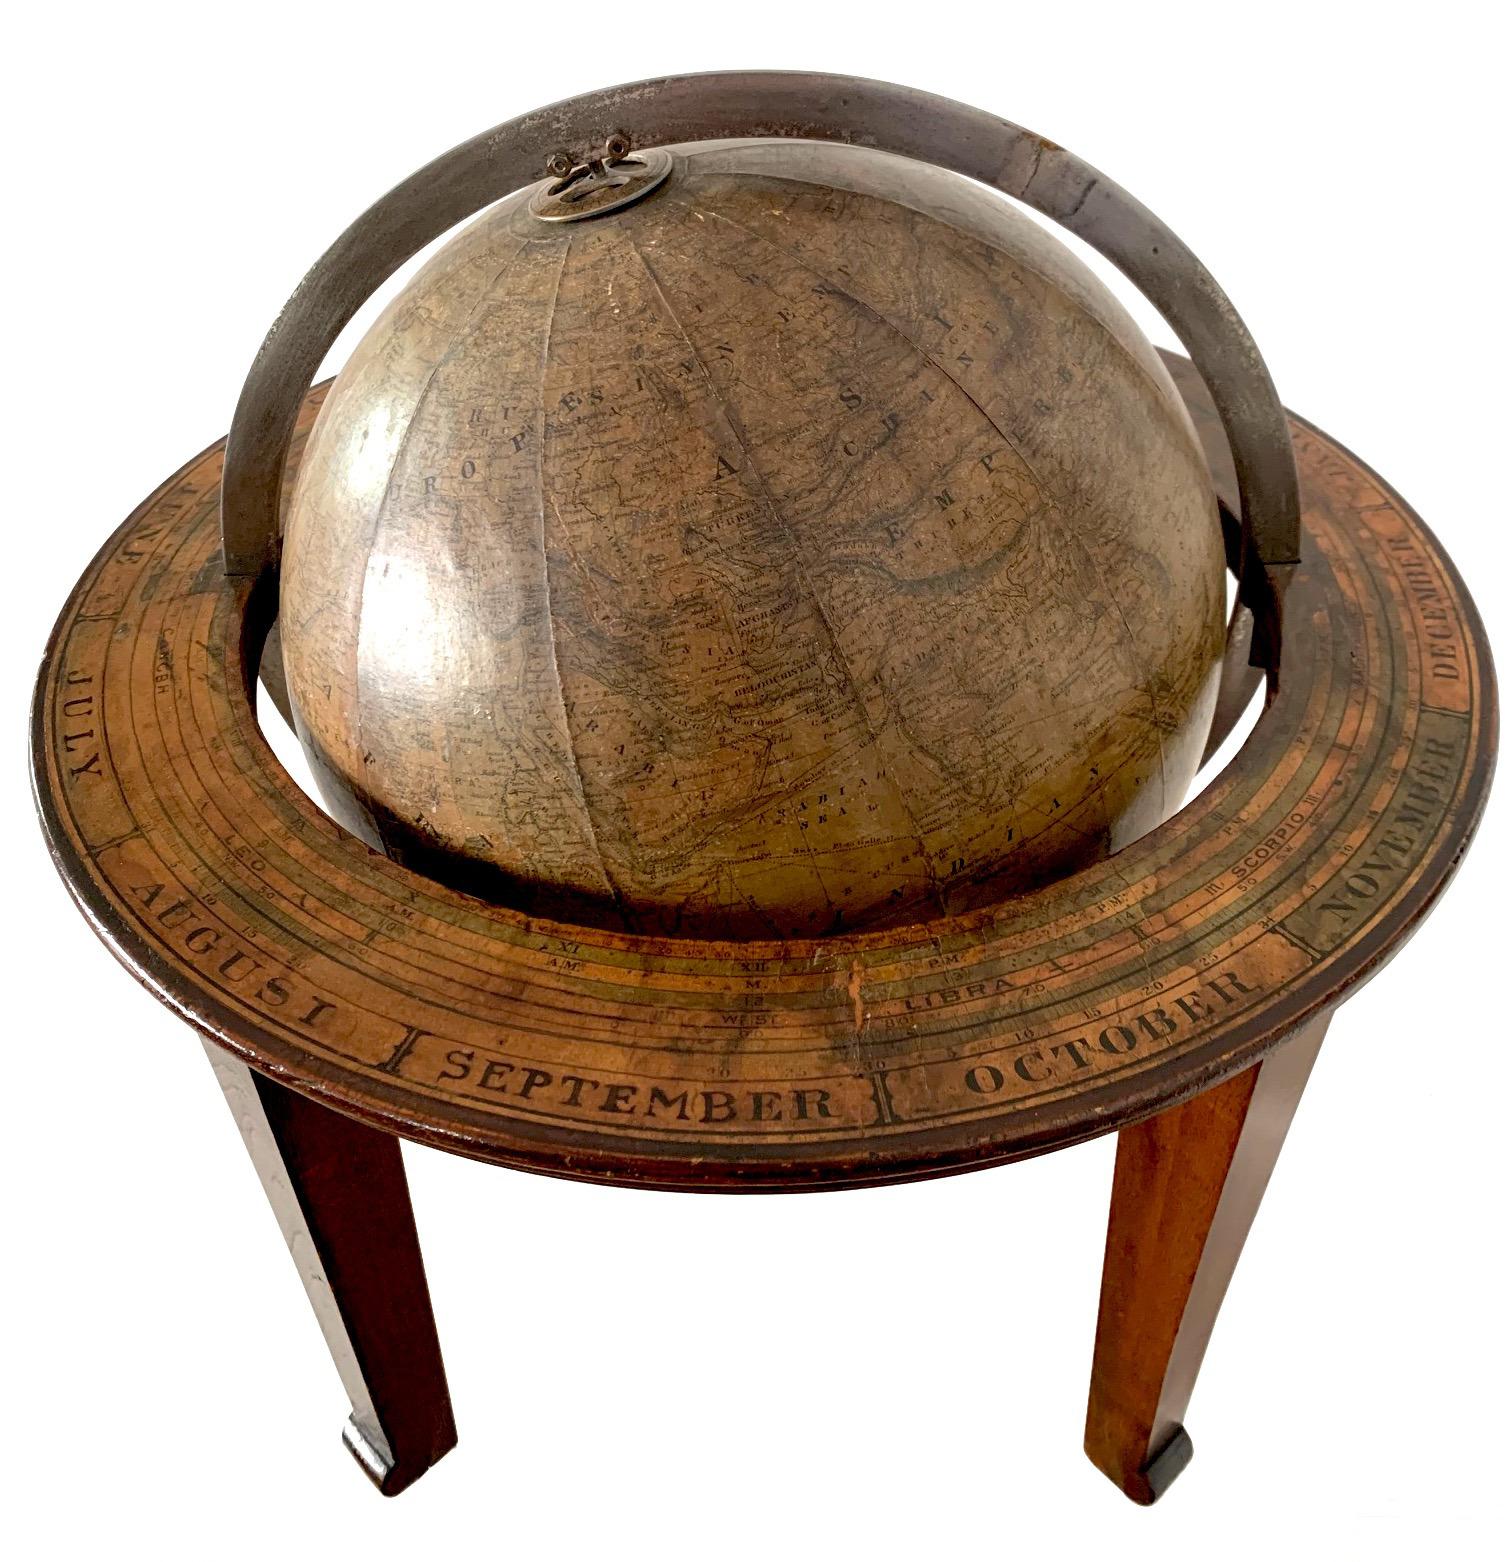 This rare table globe, signed schedler's New York on the sphere, is mounted on an elegant mahogany stand and has brass and steel fittings,
Weight 3,30kg.